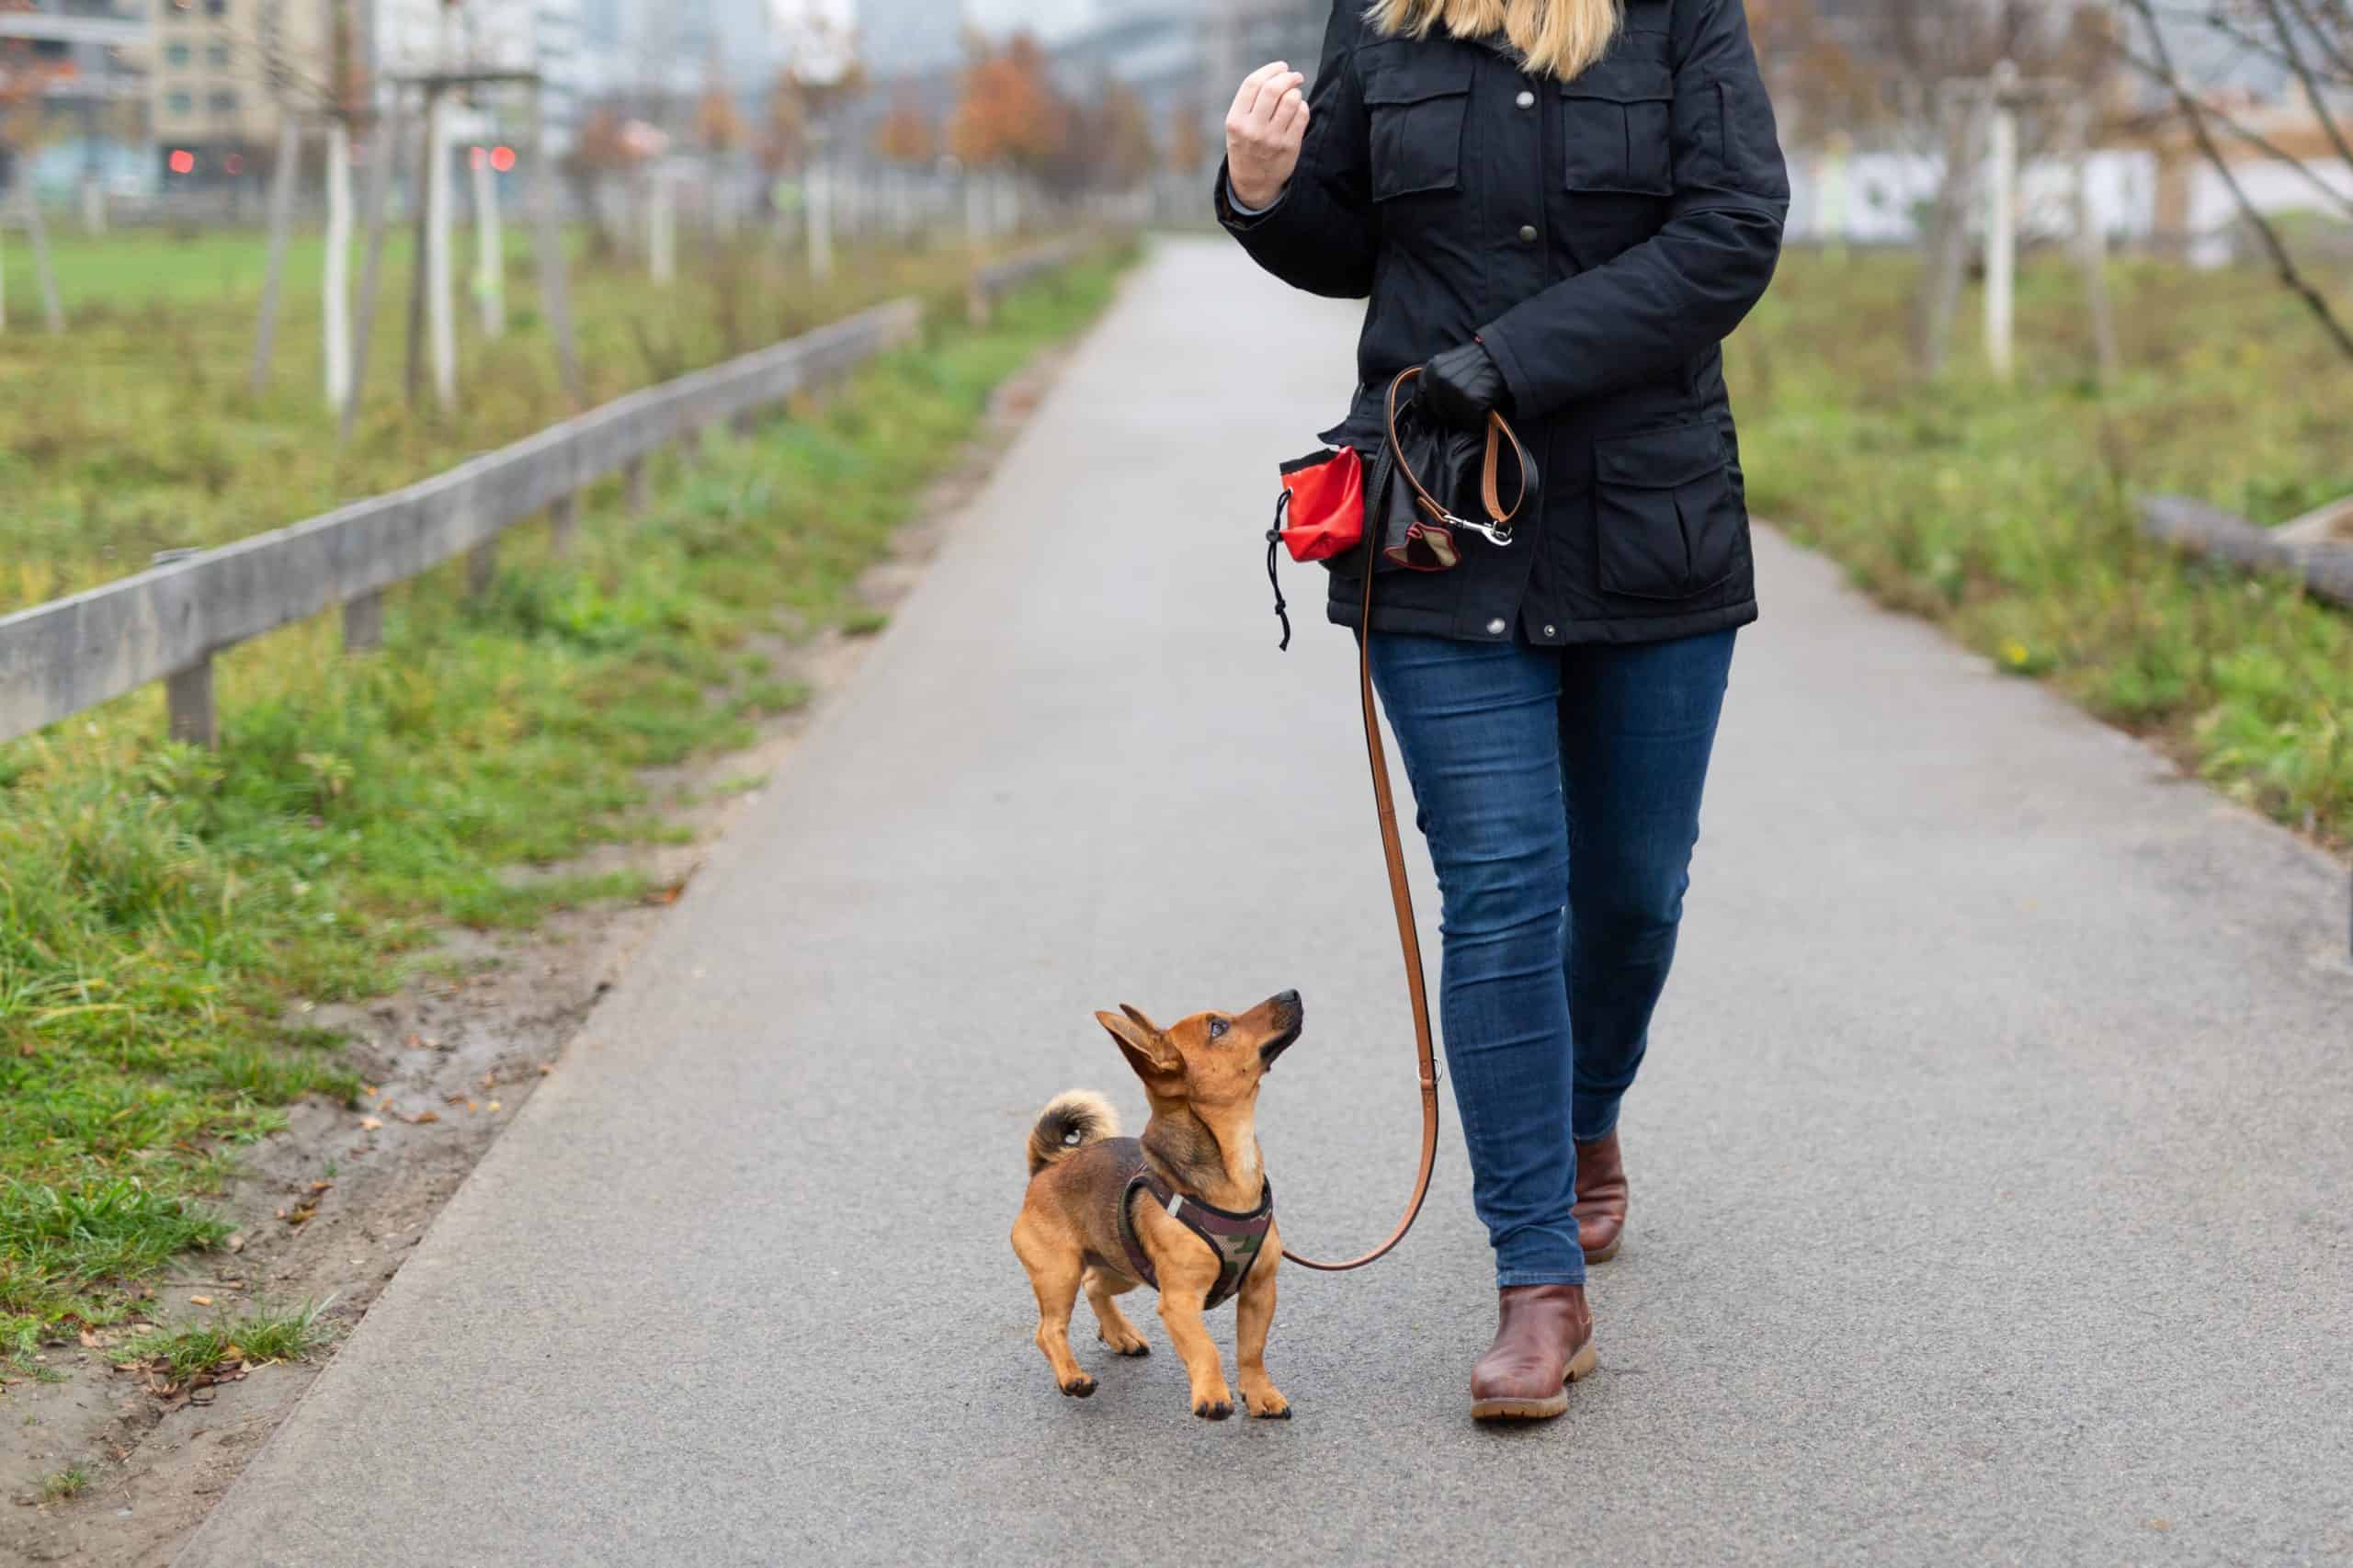 Woman trains puppy during walk. Training tips: A tired puppy is well-behaved, so make sure your puppy gets daily walks and other exercise.